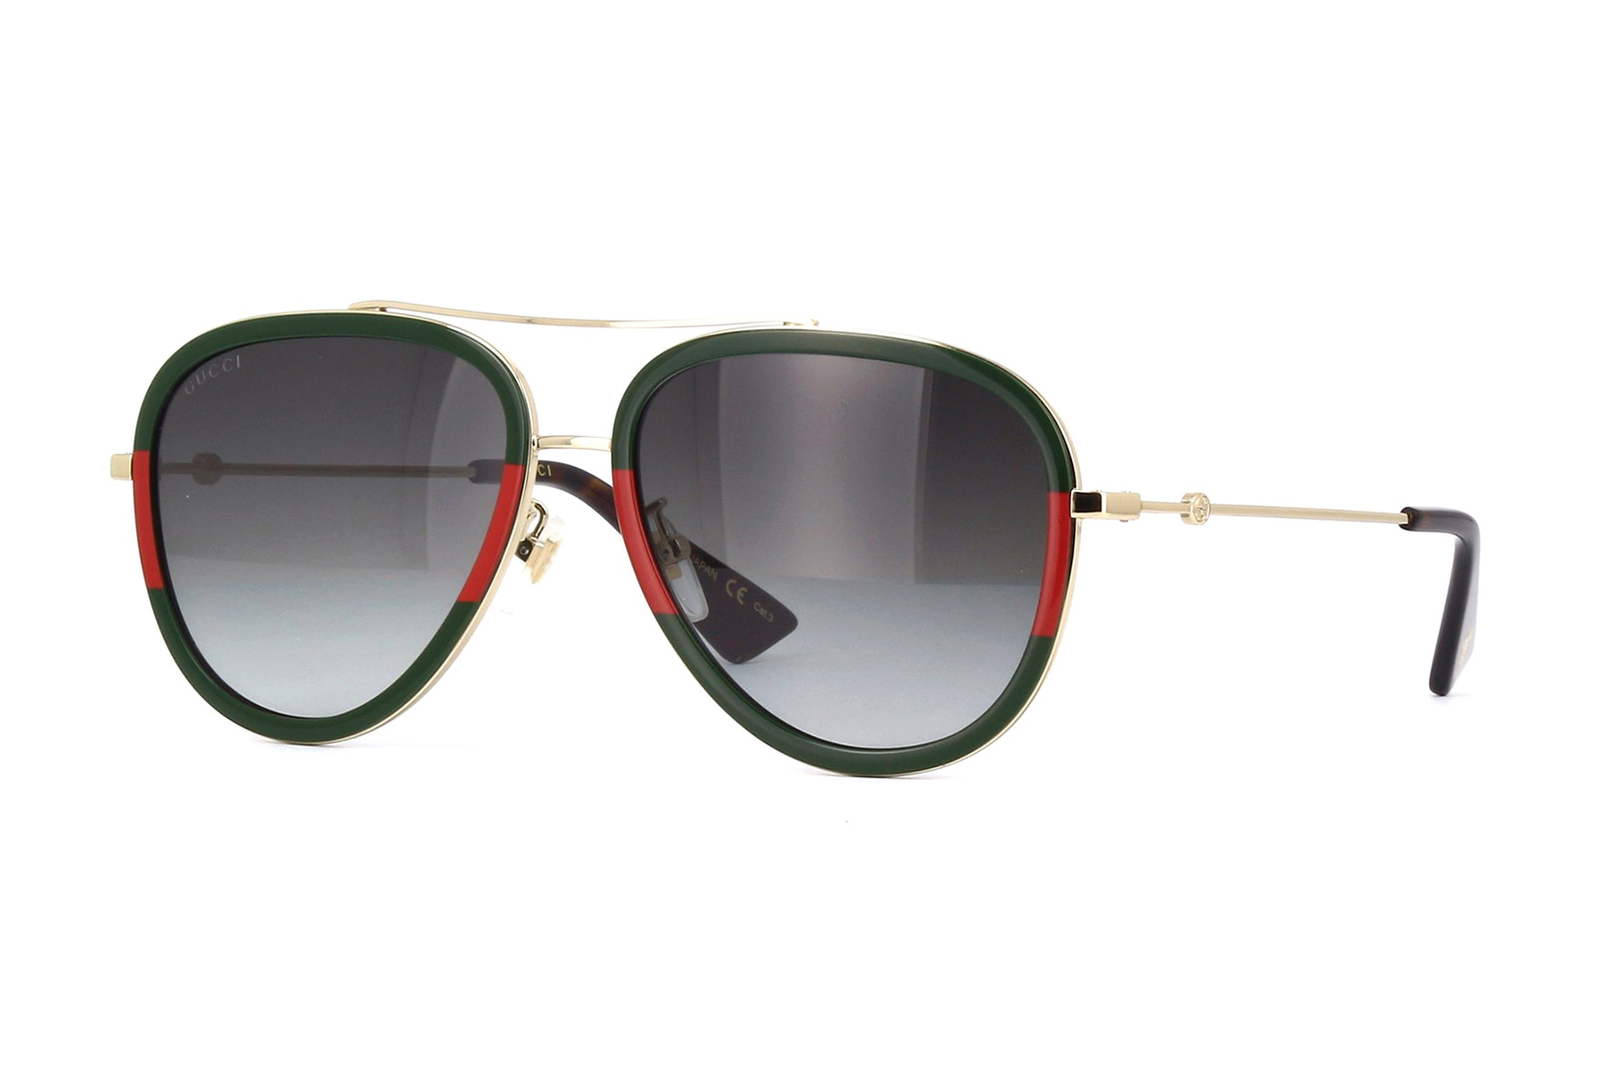 Primary image for Gucci Aviator GG0062S 003 Sunglasses Green/Red Gold With Gray Lens